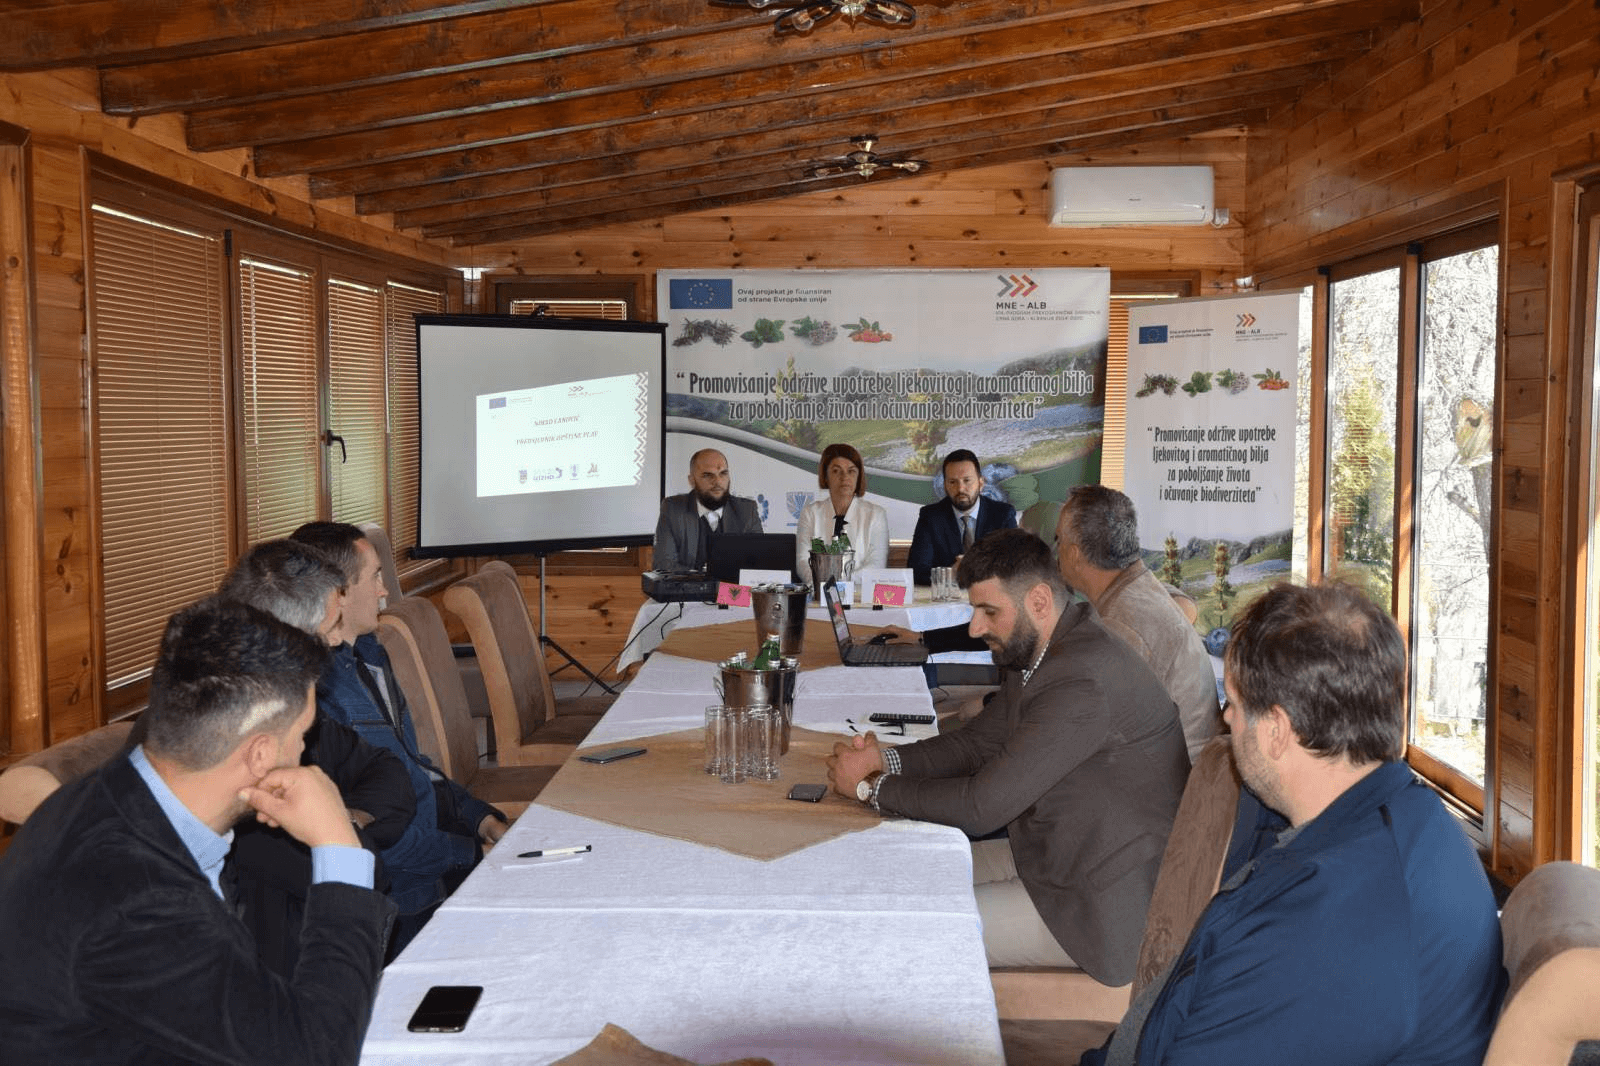 Conference on medicinal and aromatic plants held in Plav